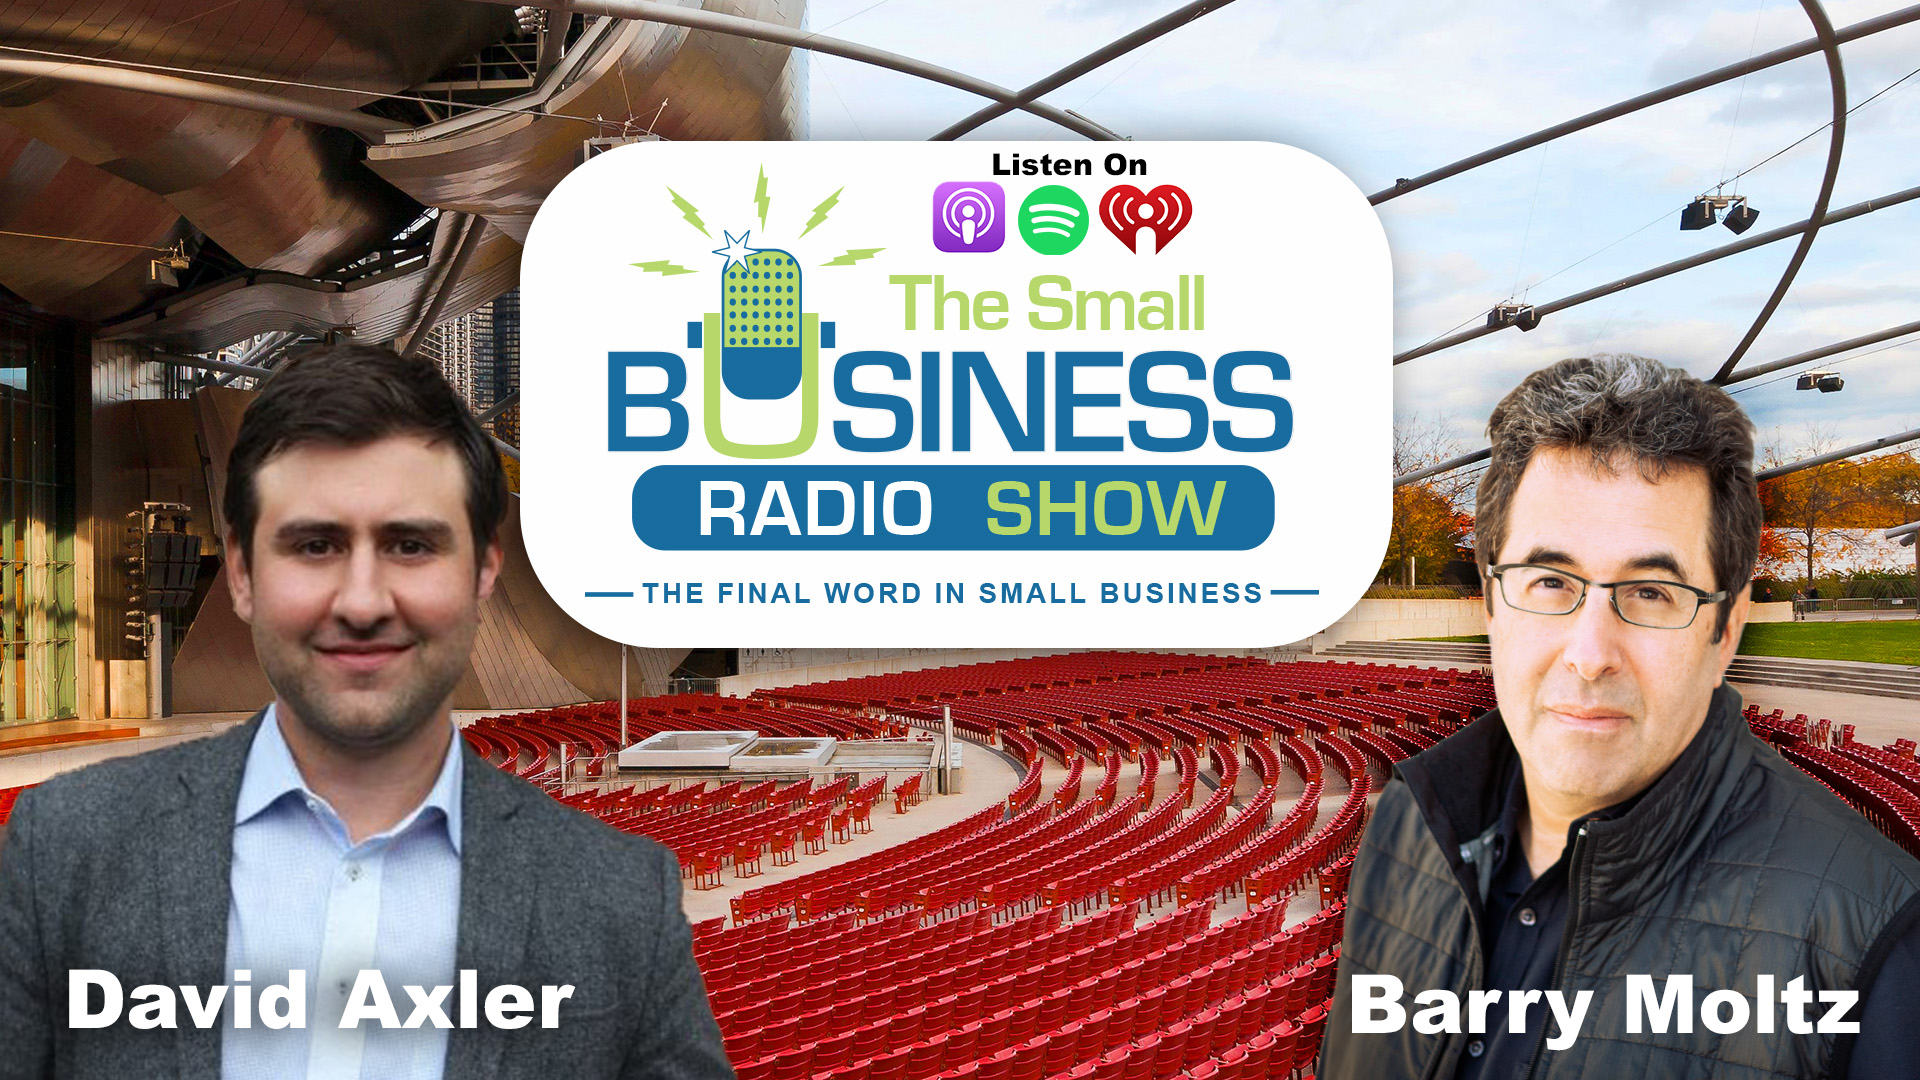 David Axler on The Small Business Radio Show accounting software